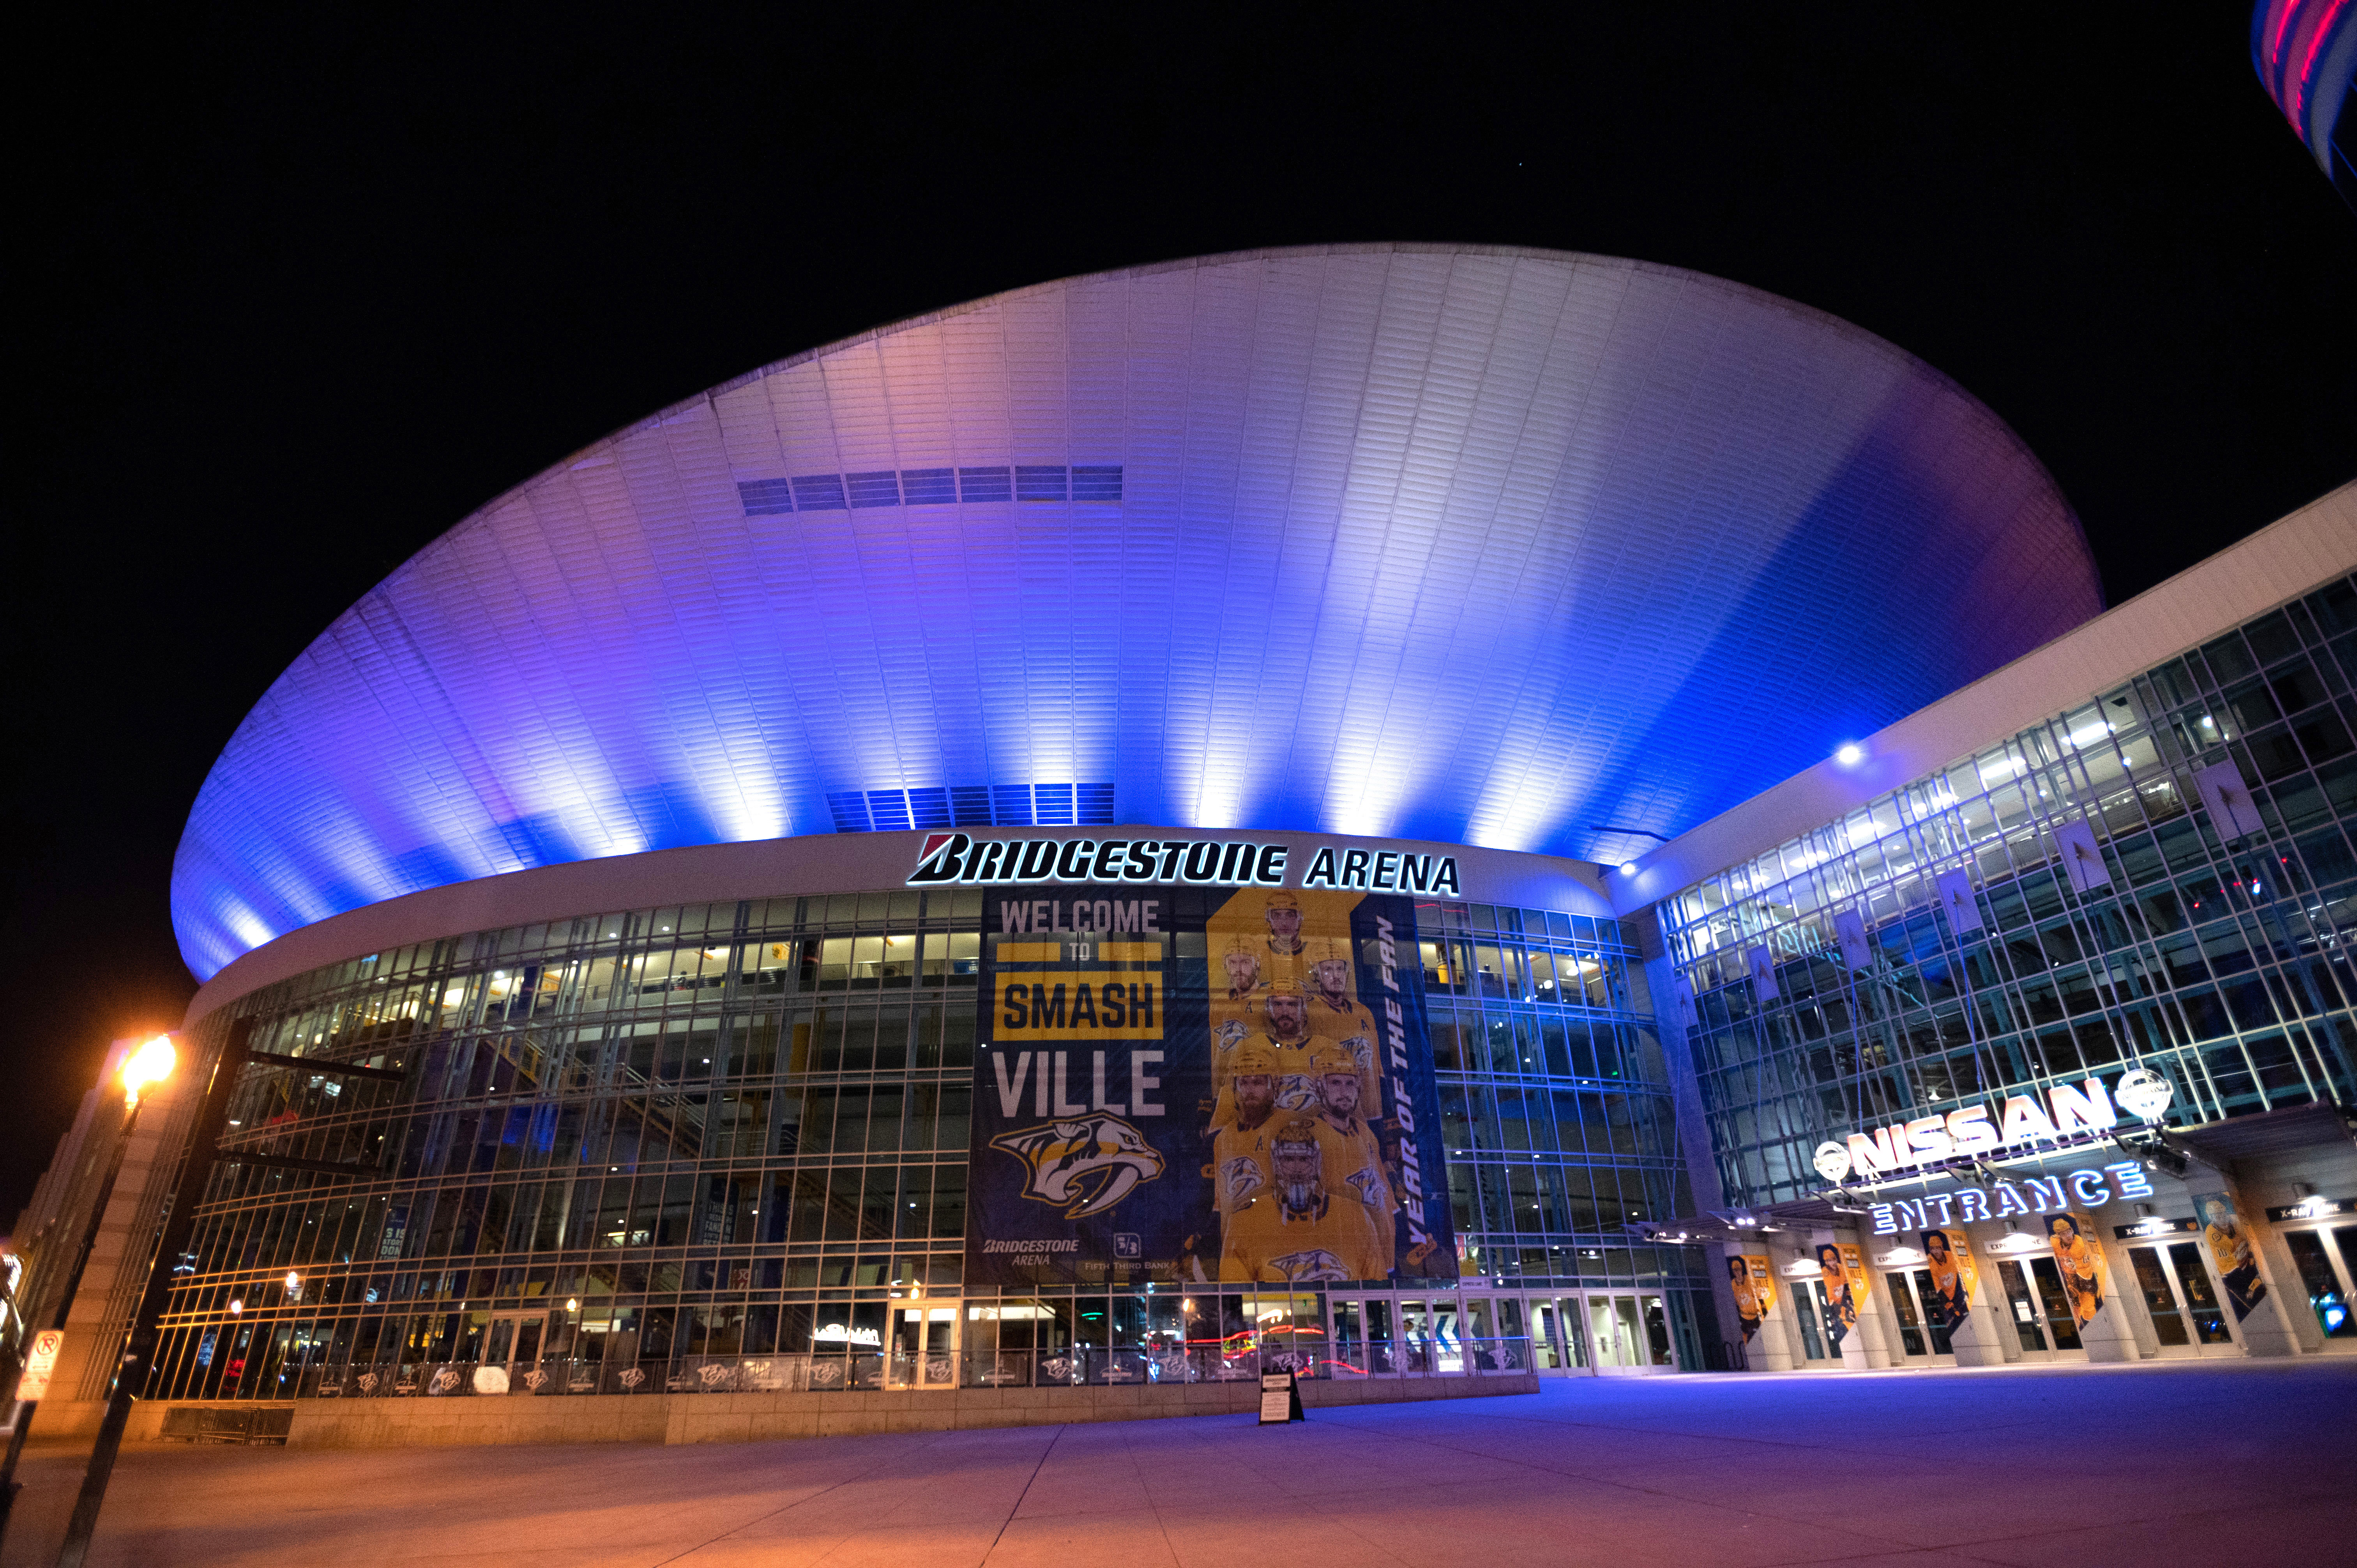 NASHVILLE, TN - APRIL 09: Bridgestone Arena is bathed in blue light on April 09, 2020 in Nashville, Tennessee. Landmarks and buildings across the nation are displaying blue lights to show support for health care workers and first responders on the front lines of the COVID-19 pandemic. (Photo by Jason Kempin/Getty Images)